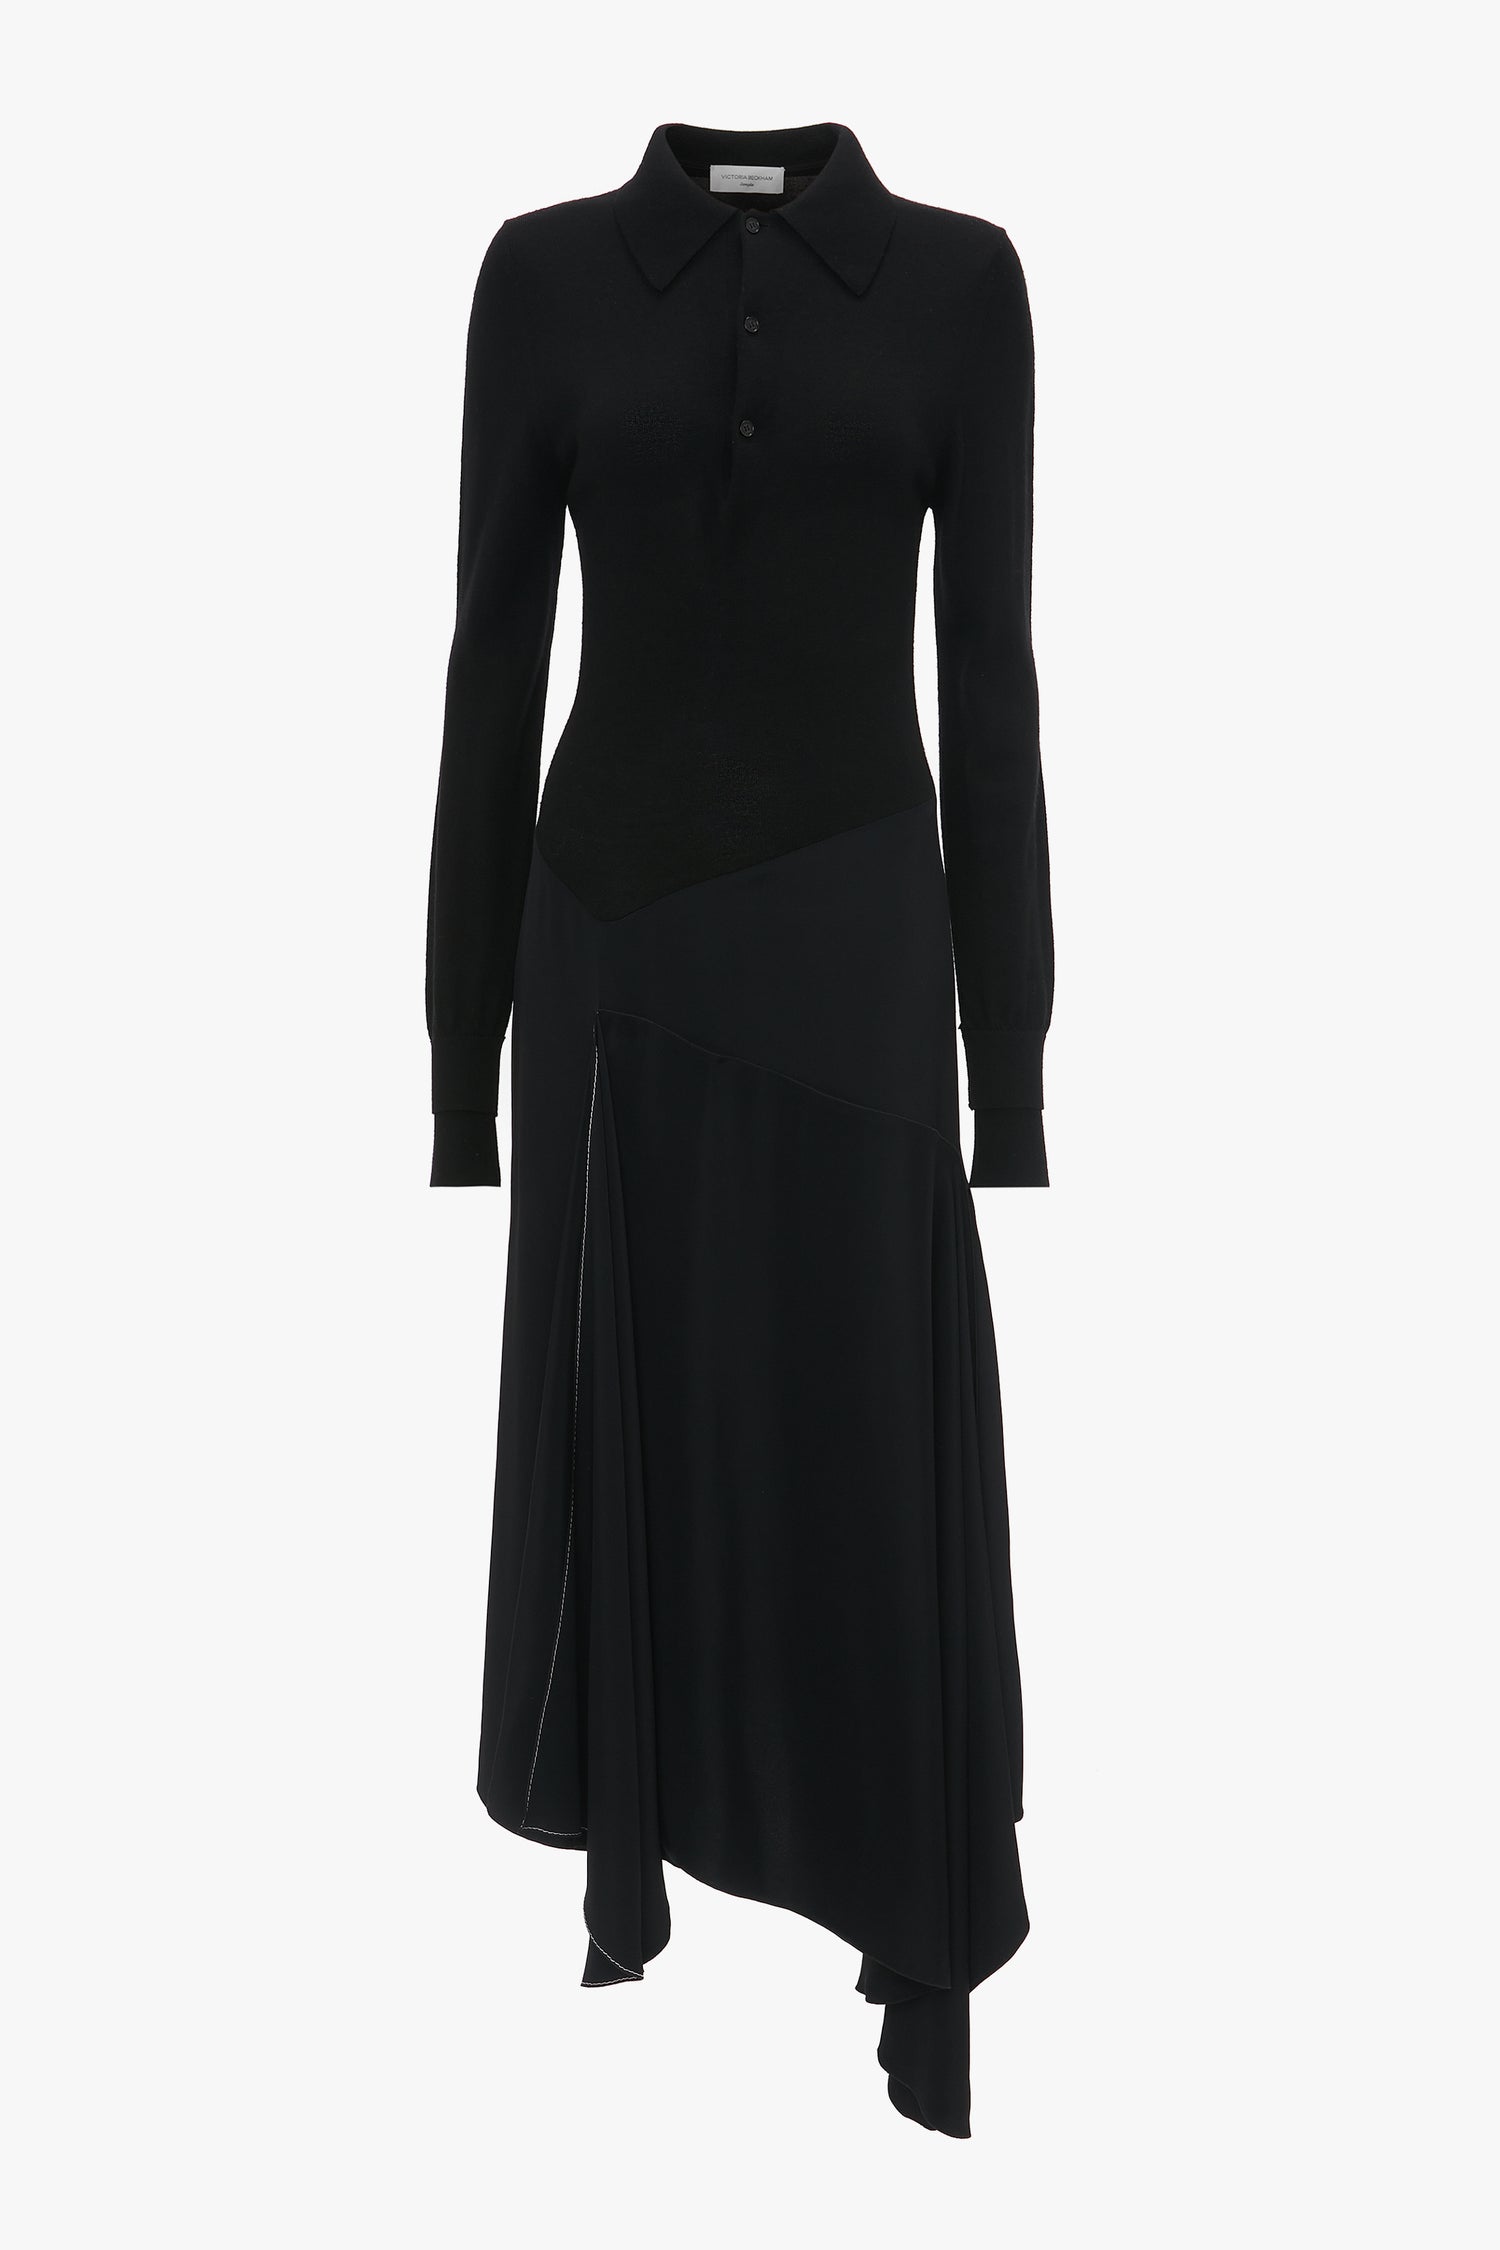 A Victoria Beckham Henley Shirt Dress In Black with a collared neckline, buttoned front, and asymmetrical hemline.